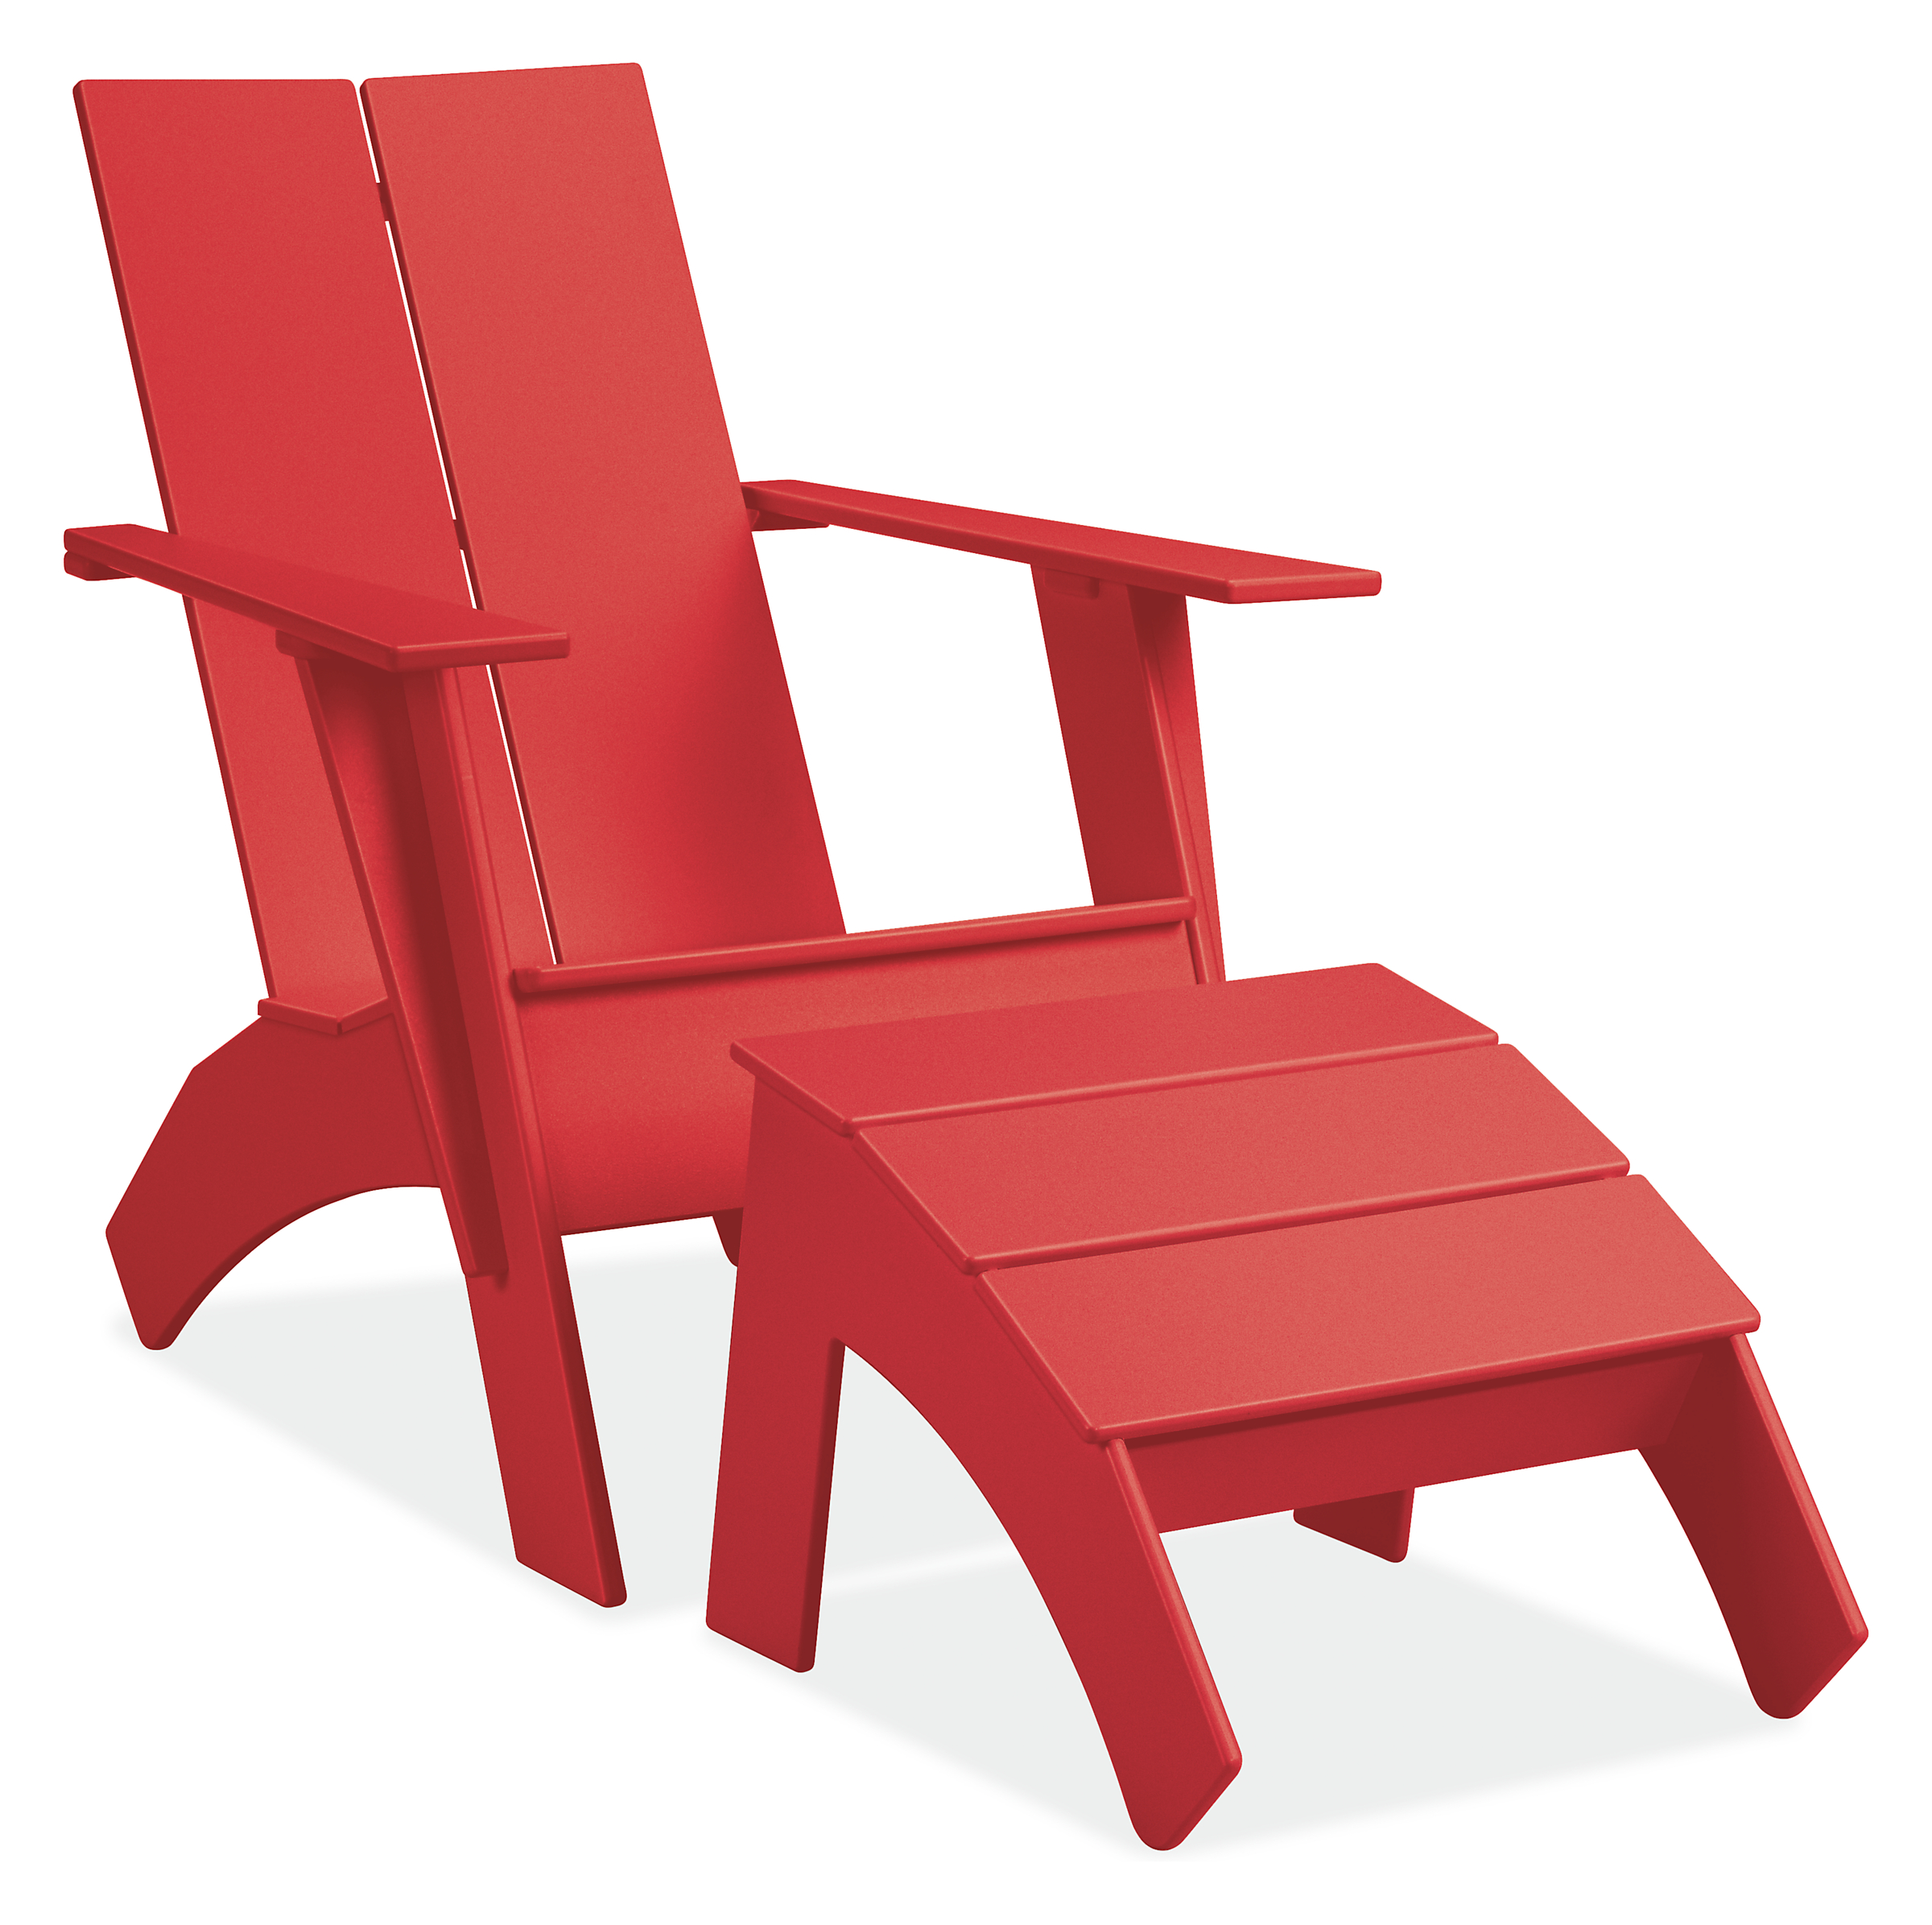 Emmet Tall Lounge Chair in Red with Bottle Opener
Emmet 19w 23d 15h Tall Ottoman in Red